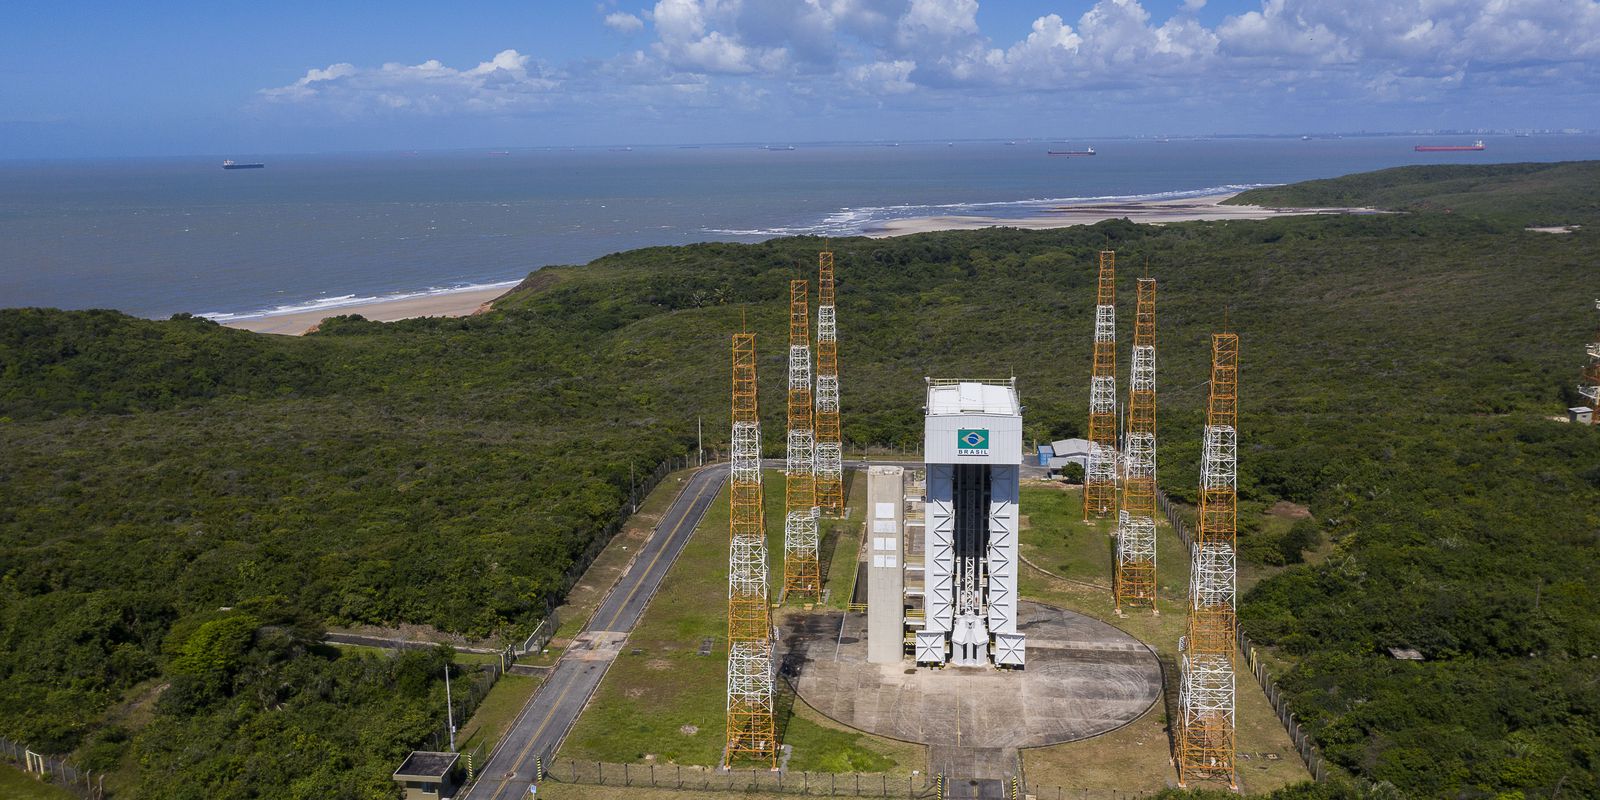 Rocket will be launched from Alcântara base this Sunday